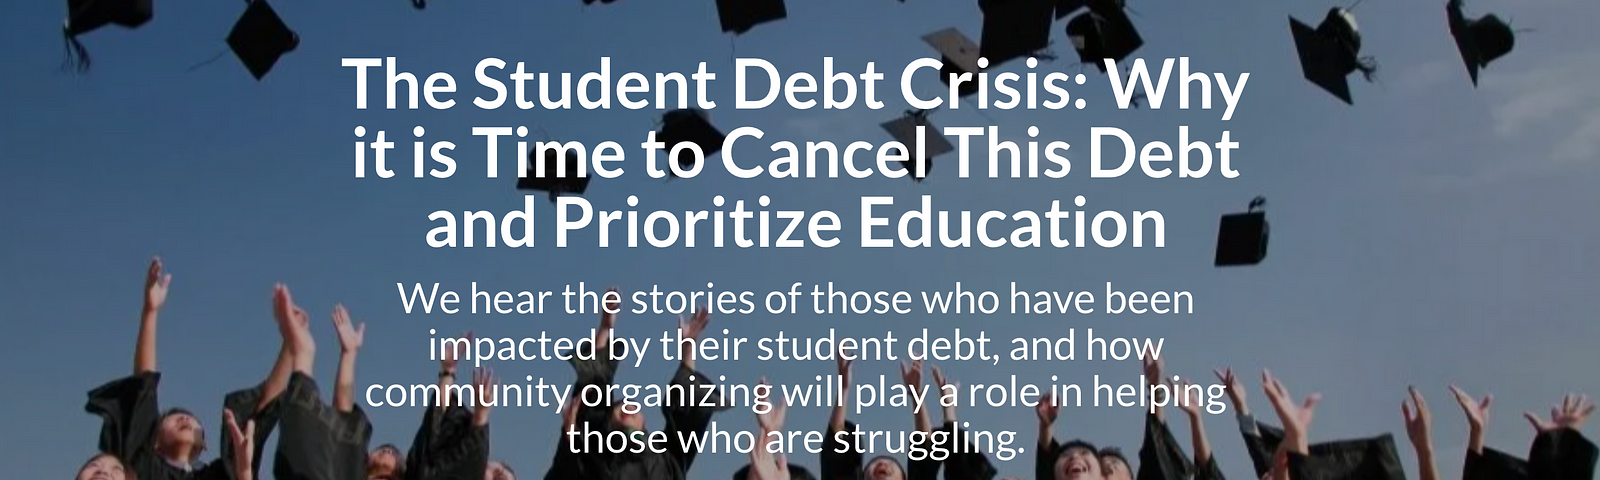 Image of students at graduation throwing caps into the air. Text: The Student Debt Crisis: Why it is Time to Cancel this Debt and Prioritize Education. We hear the stories of those who have been impacted by their student debt, and how community organizing will play a role in helping those who are struggling